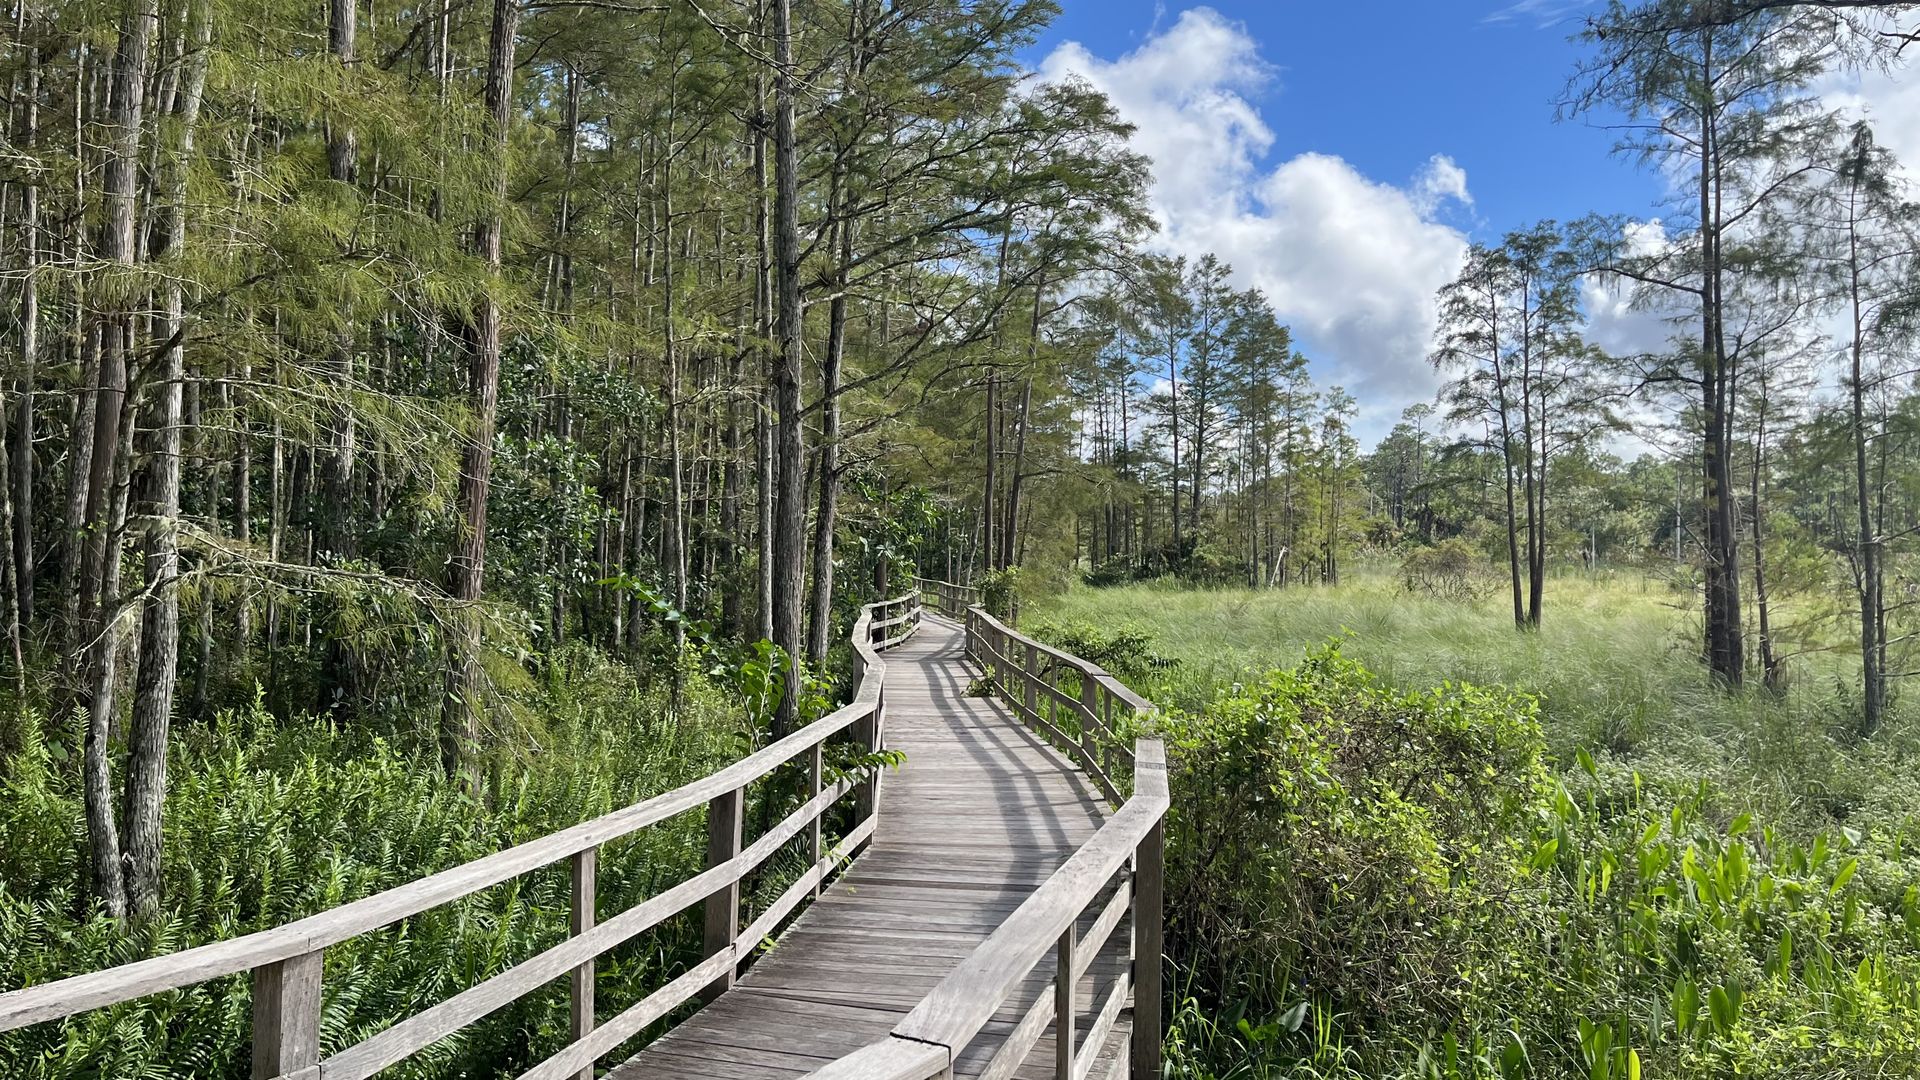 A wooden boardwalk with a cypress tree forest on one side and the low shrubs of a prairie on the other.